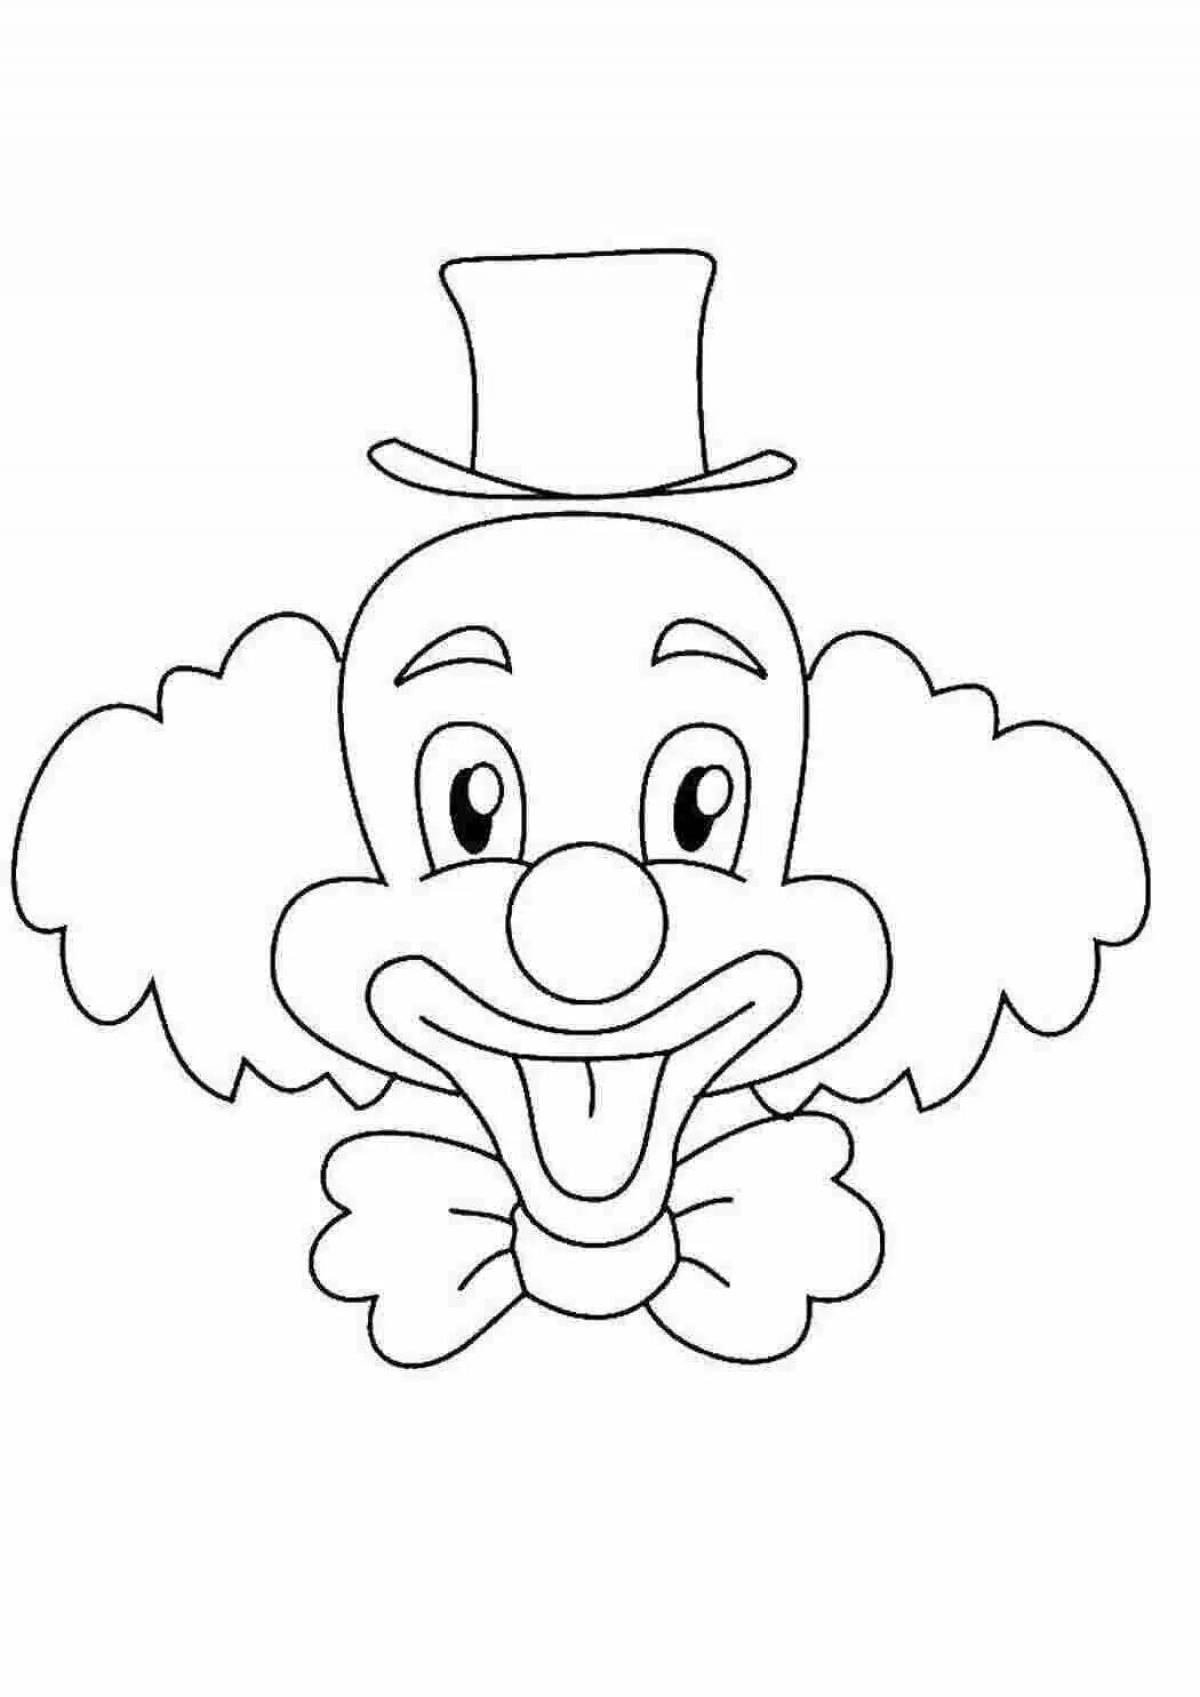 Attractive coloring page visiting a clown